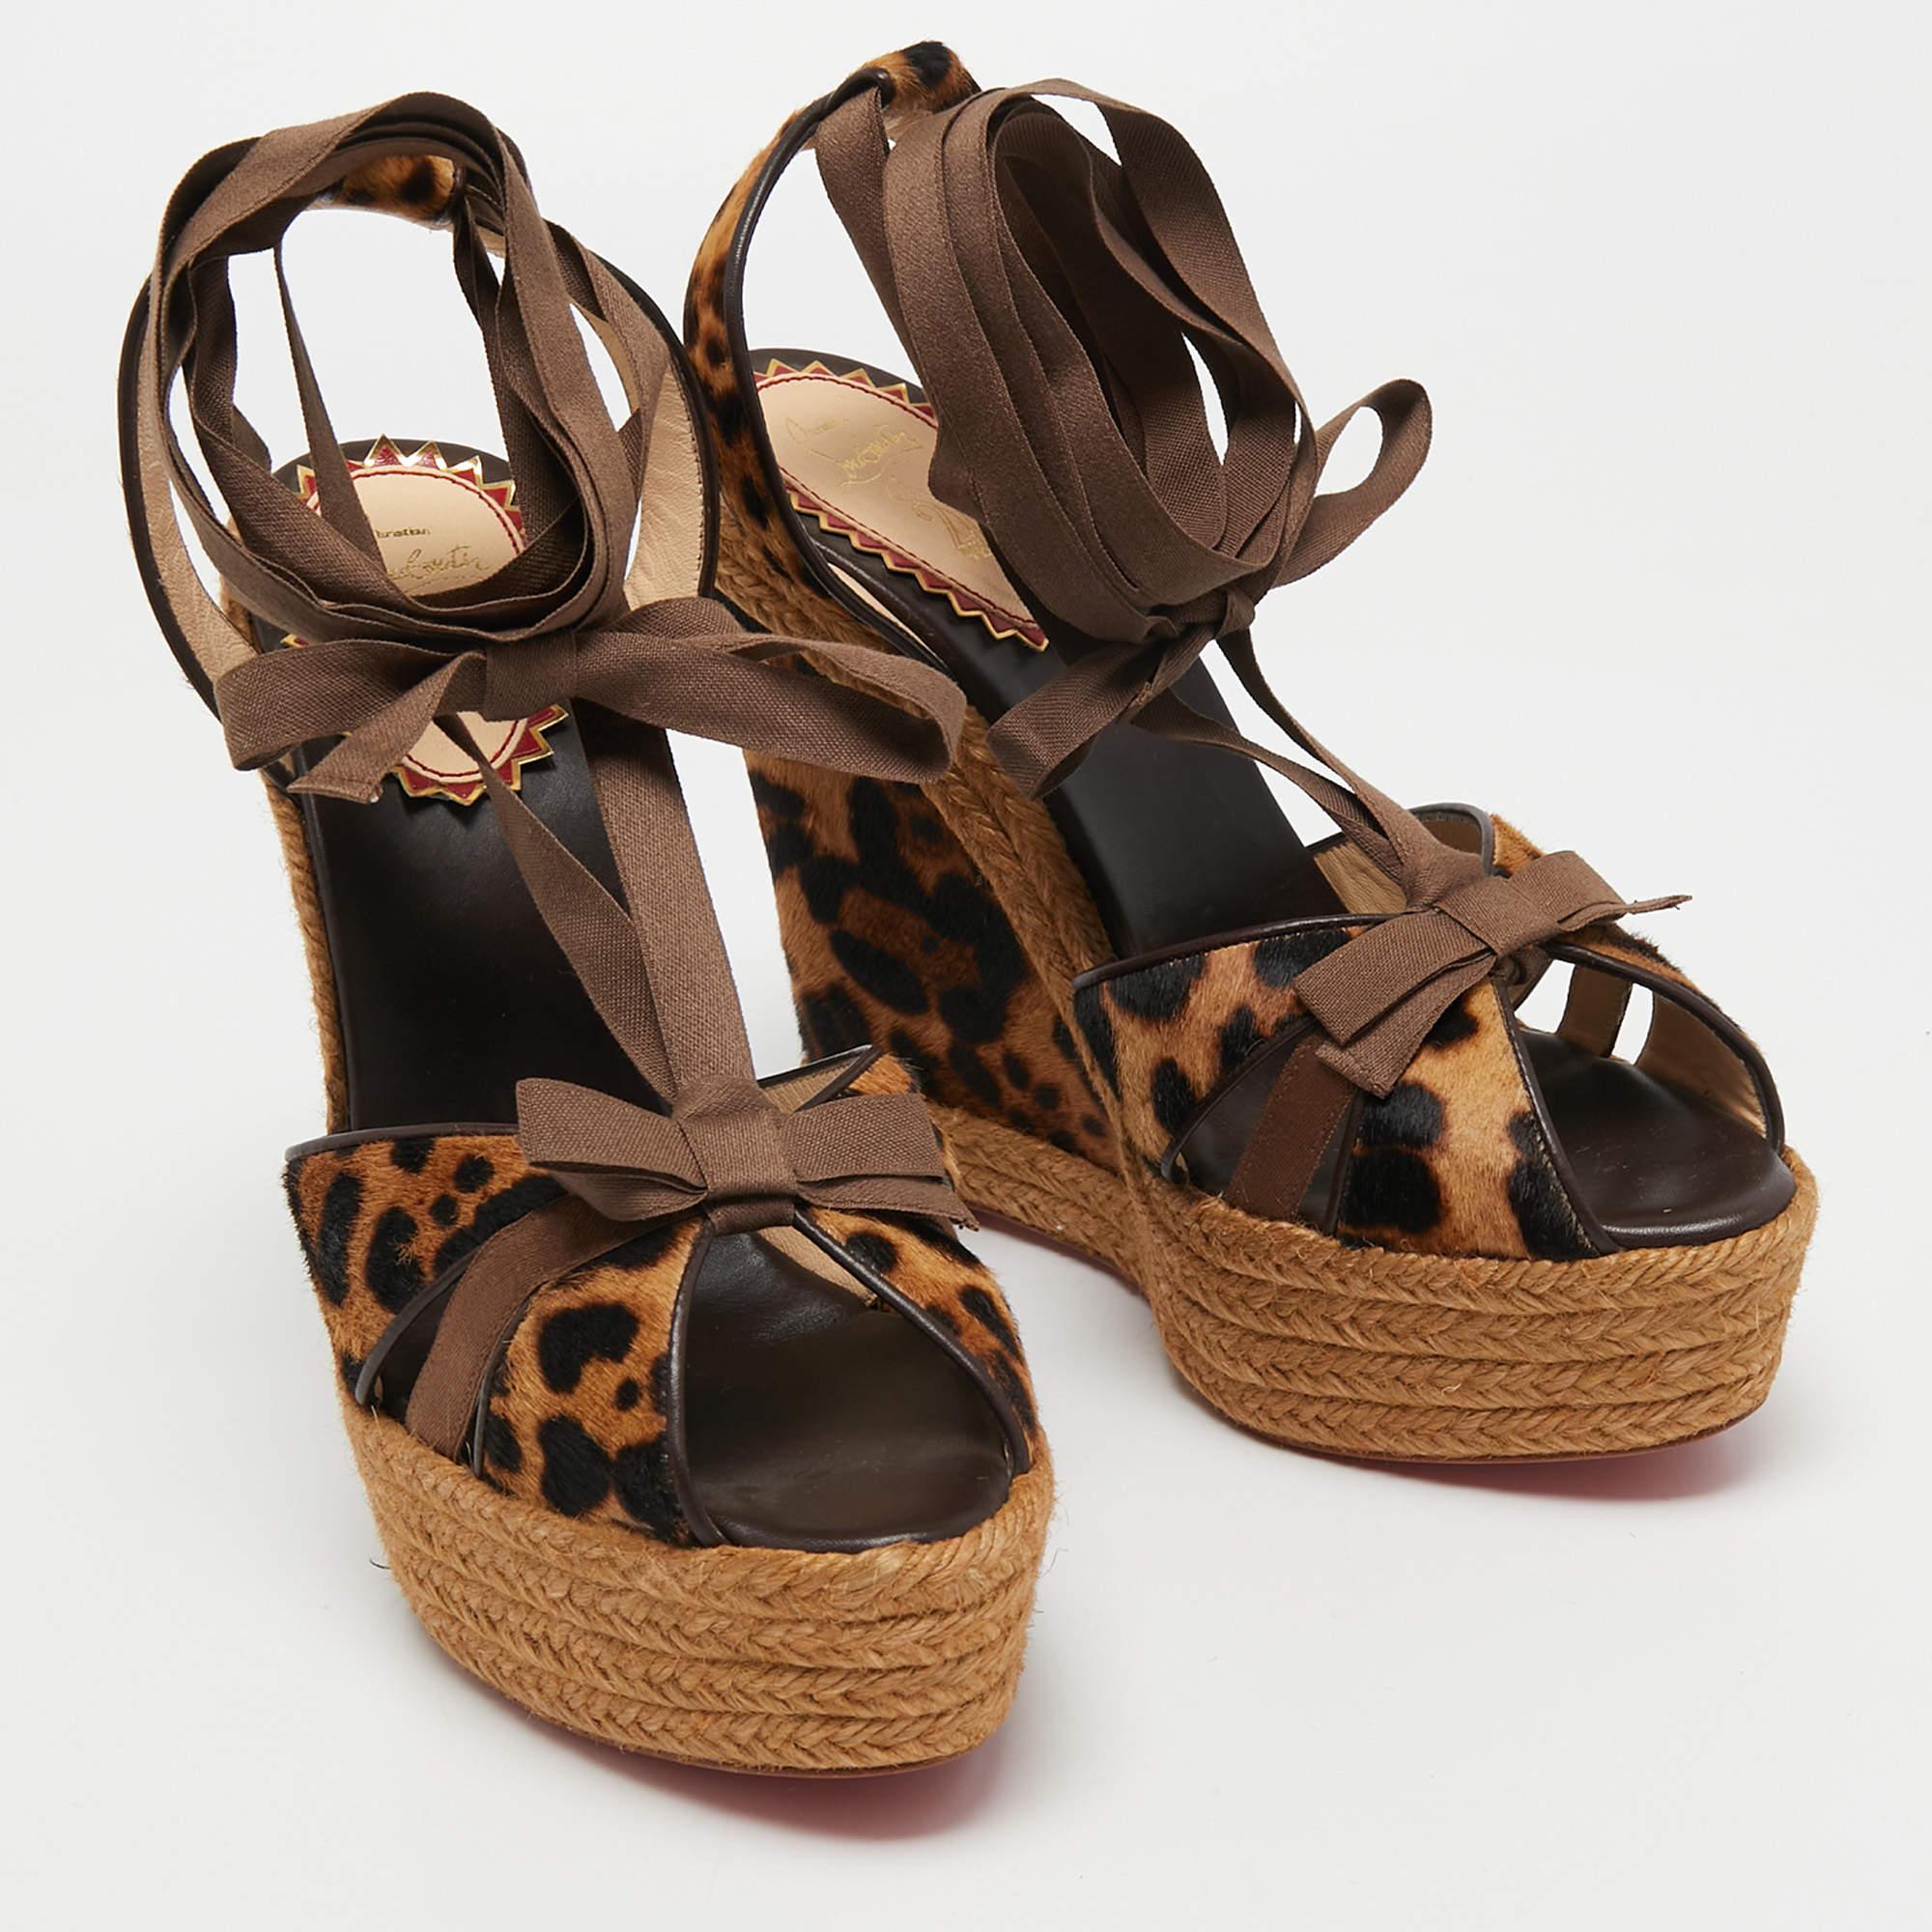 Christian Louboutin Brown/Black Calf Hair and Fabric Isabelle Wedge Size 41 1